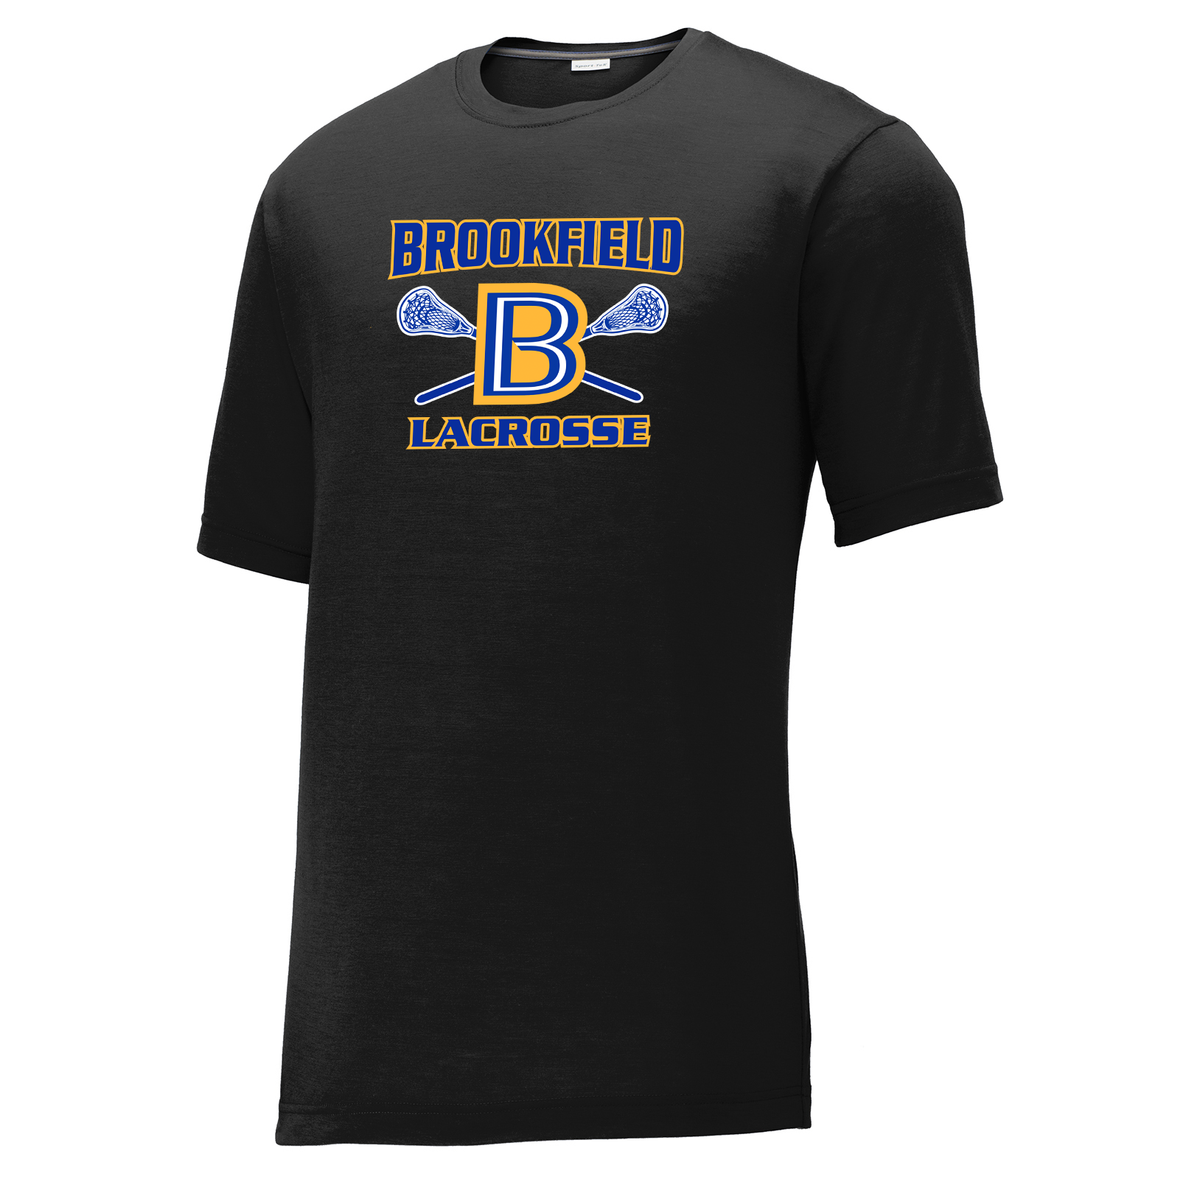 Brookfield Lacrosse CottonTouch Performance T-Shirt